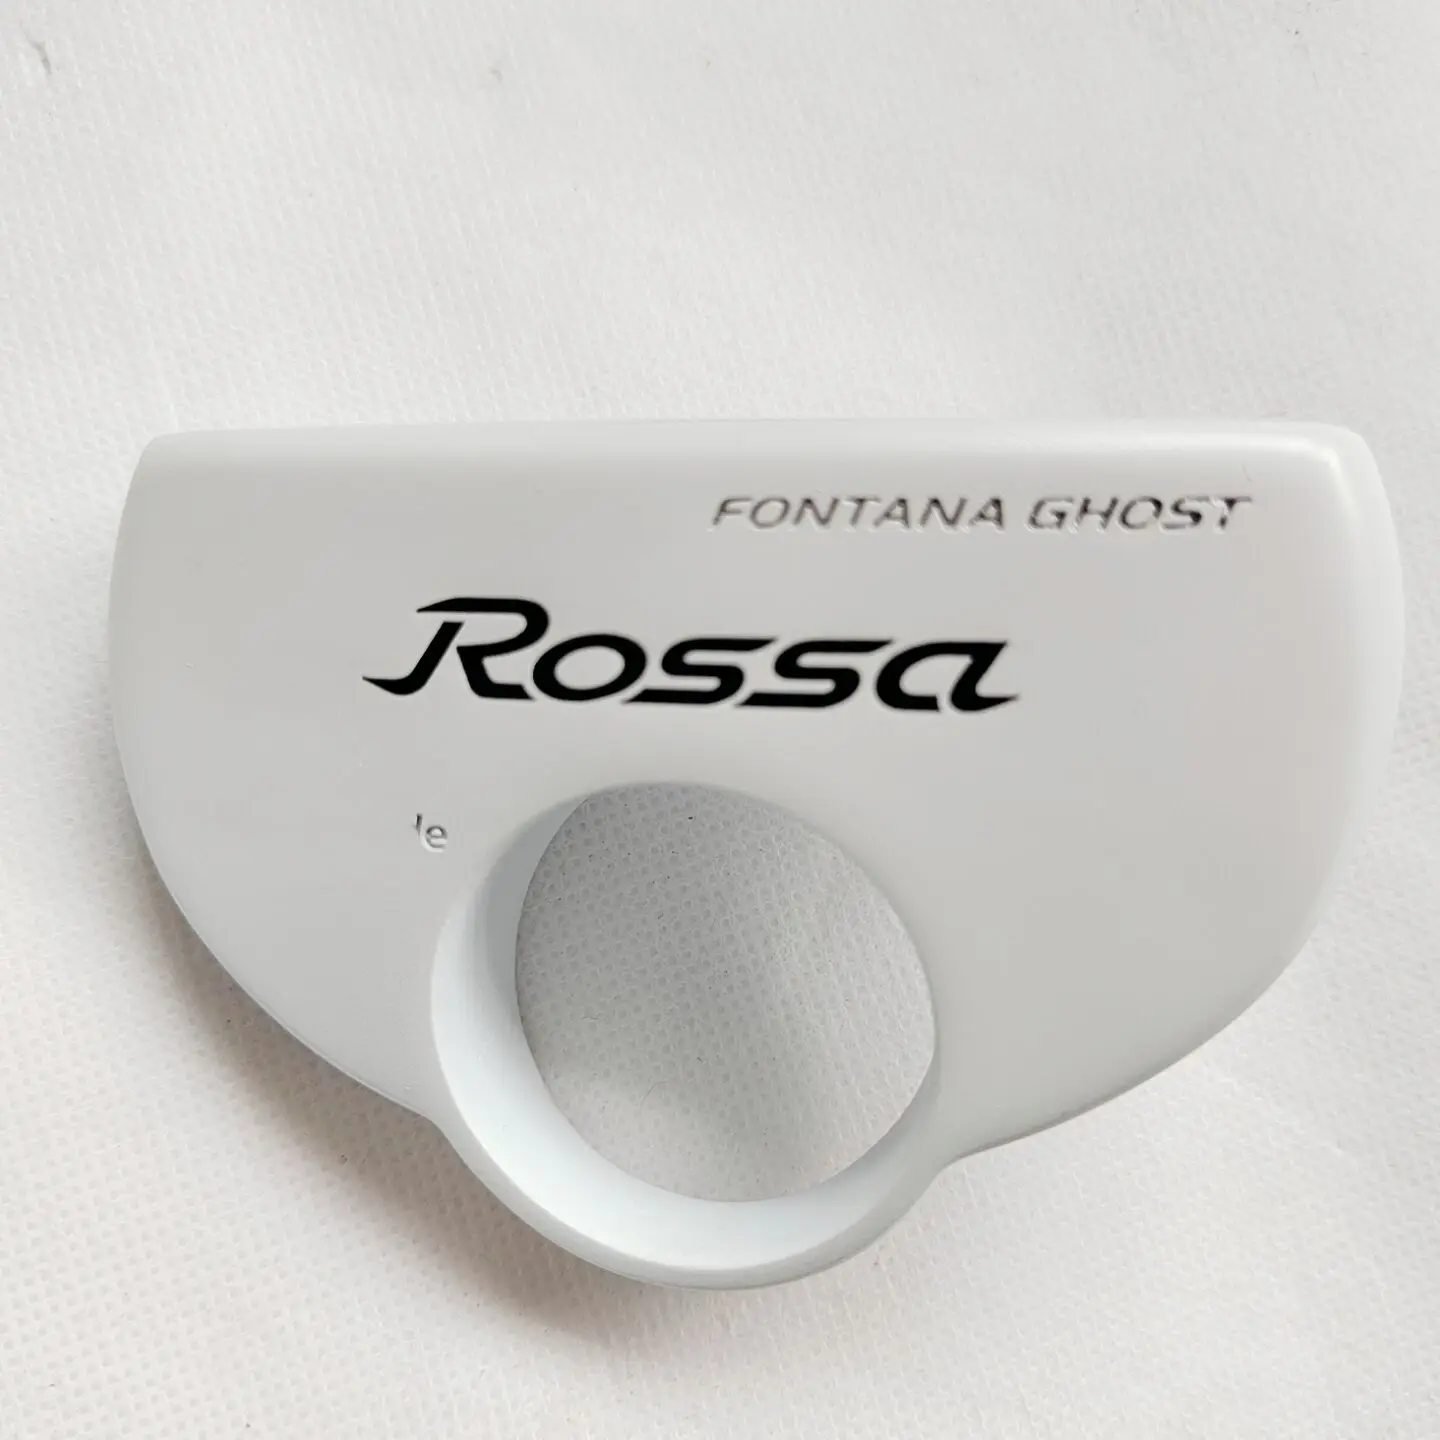 New Golf clubs heads authentic  Rossa Golf putter heads  white color Golf heads no Clubs shaft Special treatment